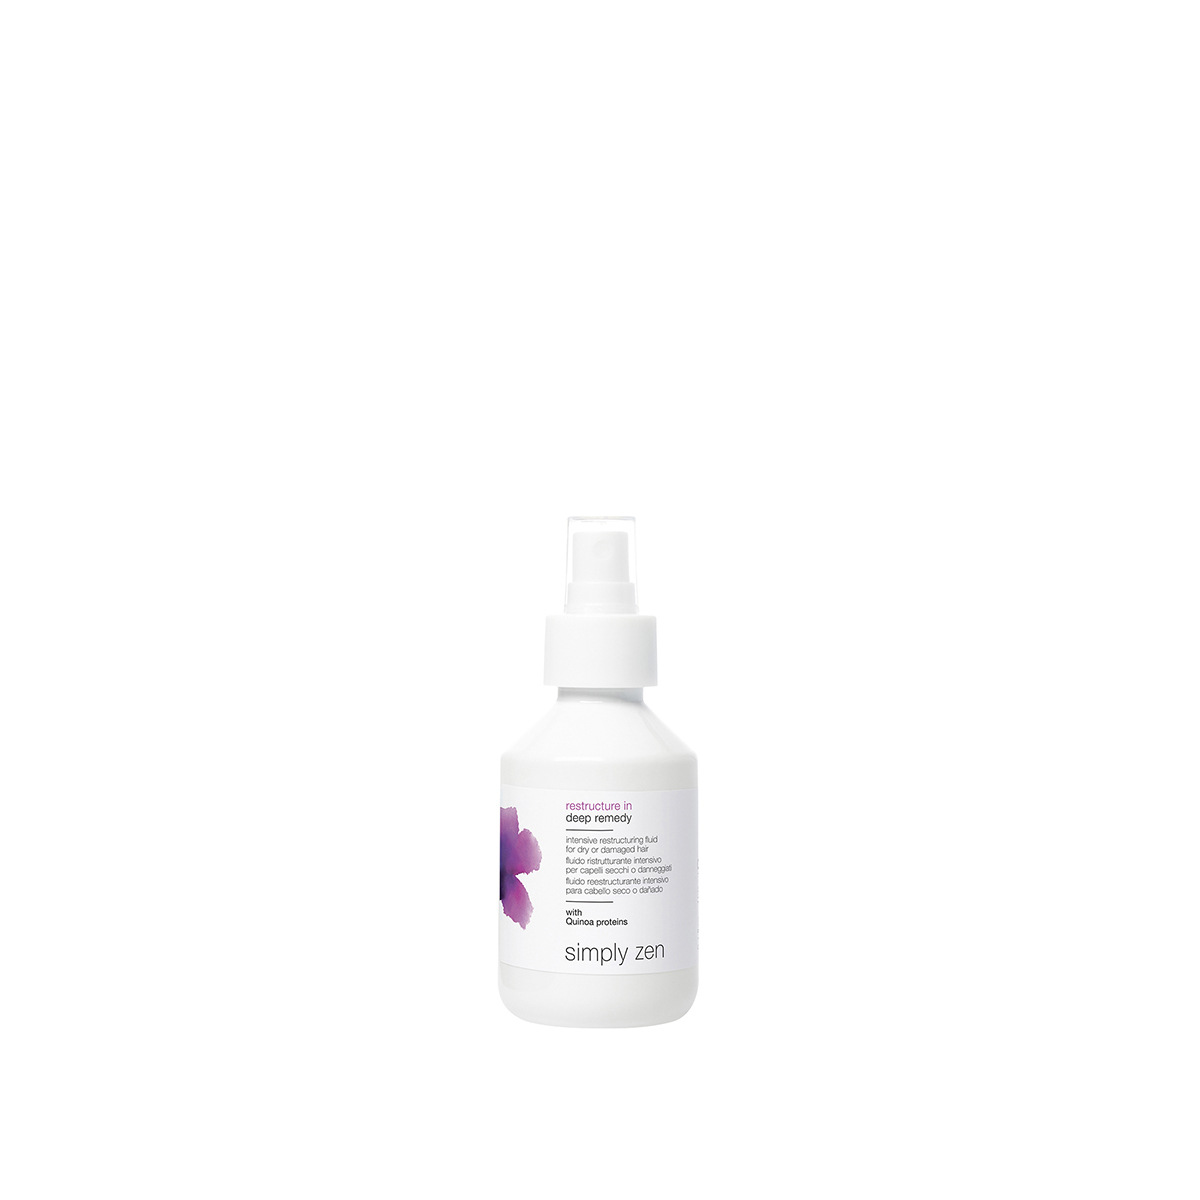 SZ Restructure In Deep Remedy 150ml